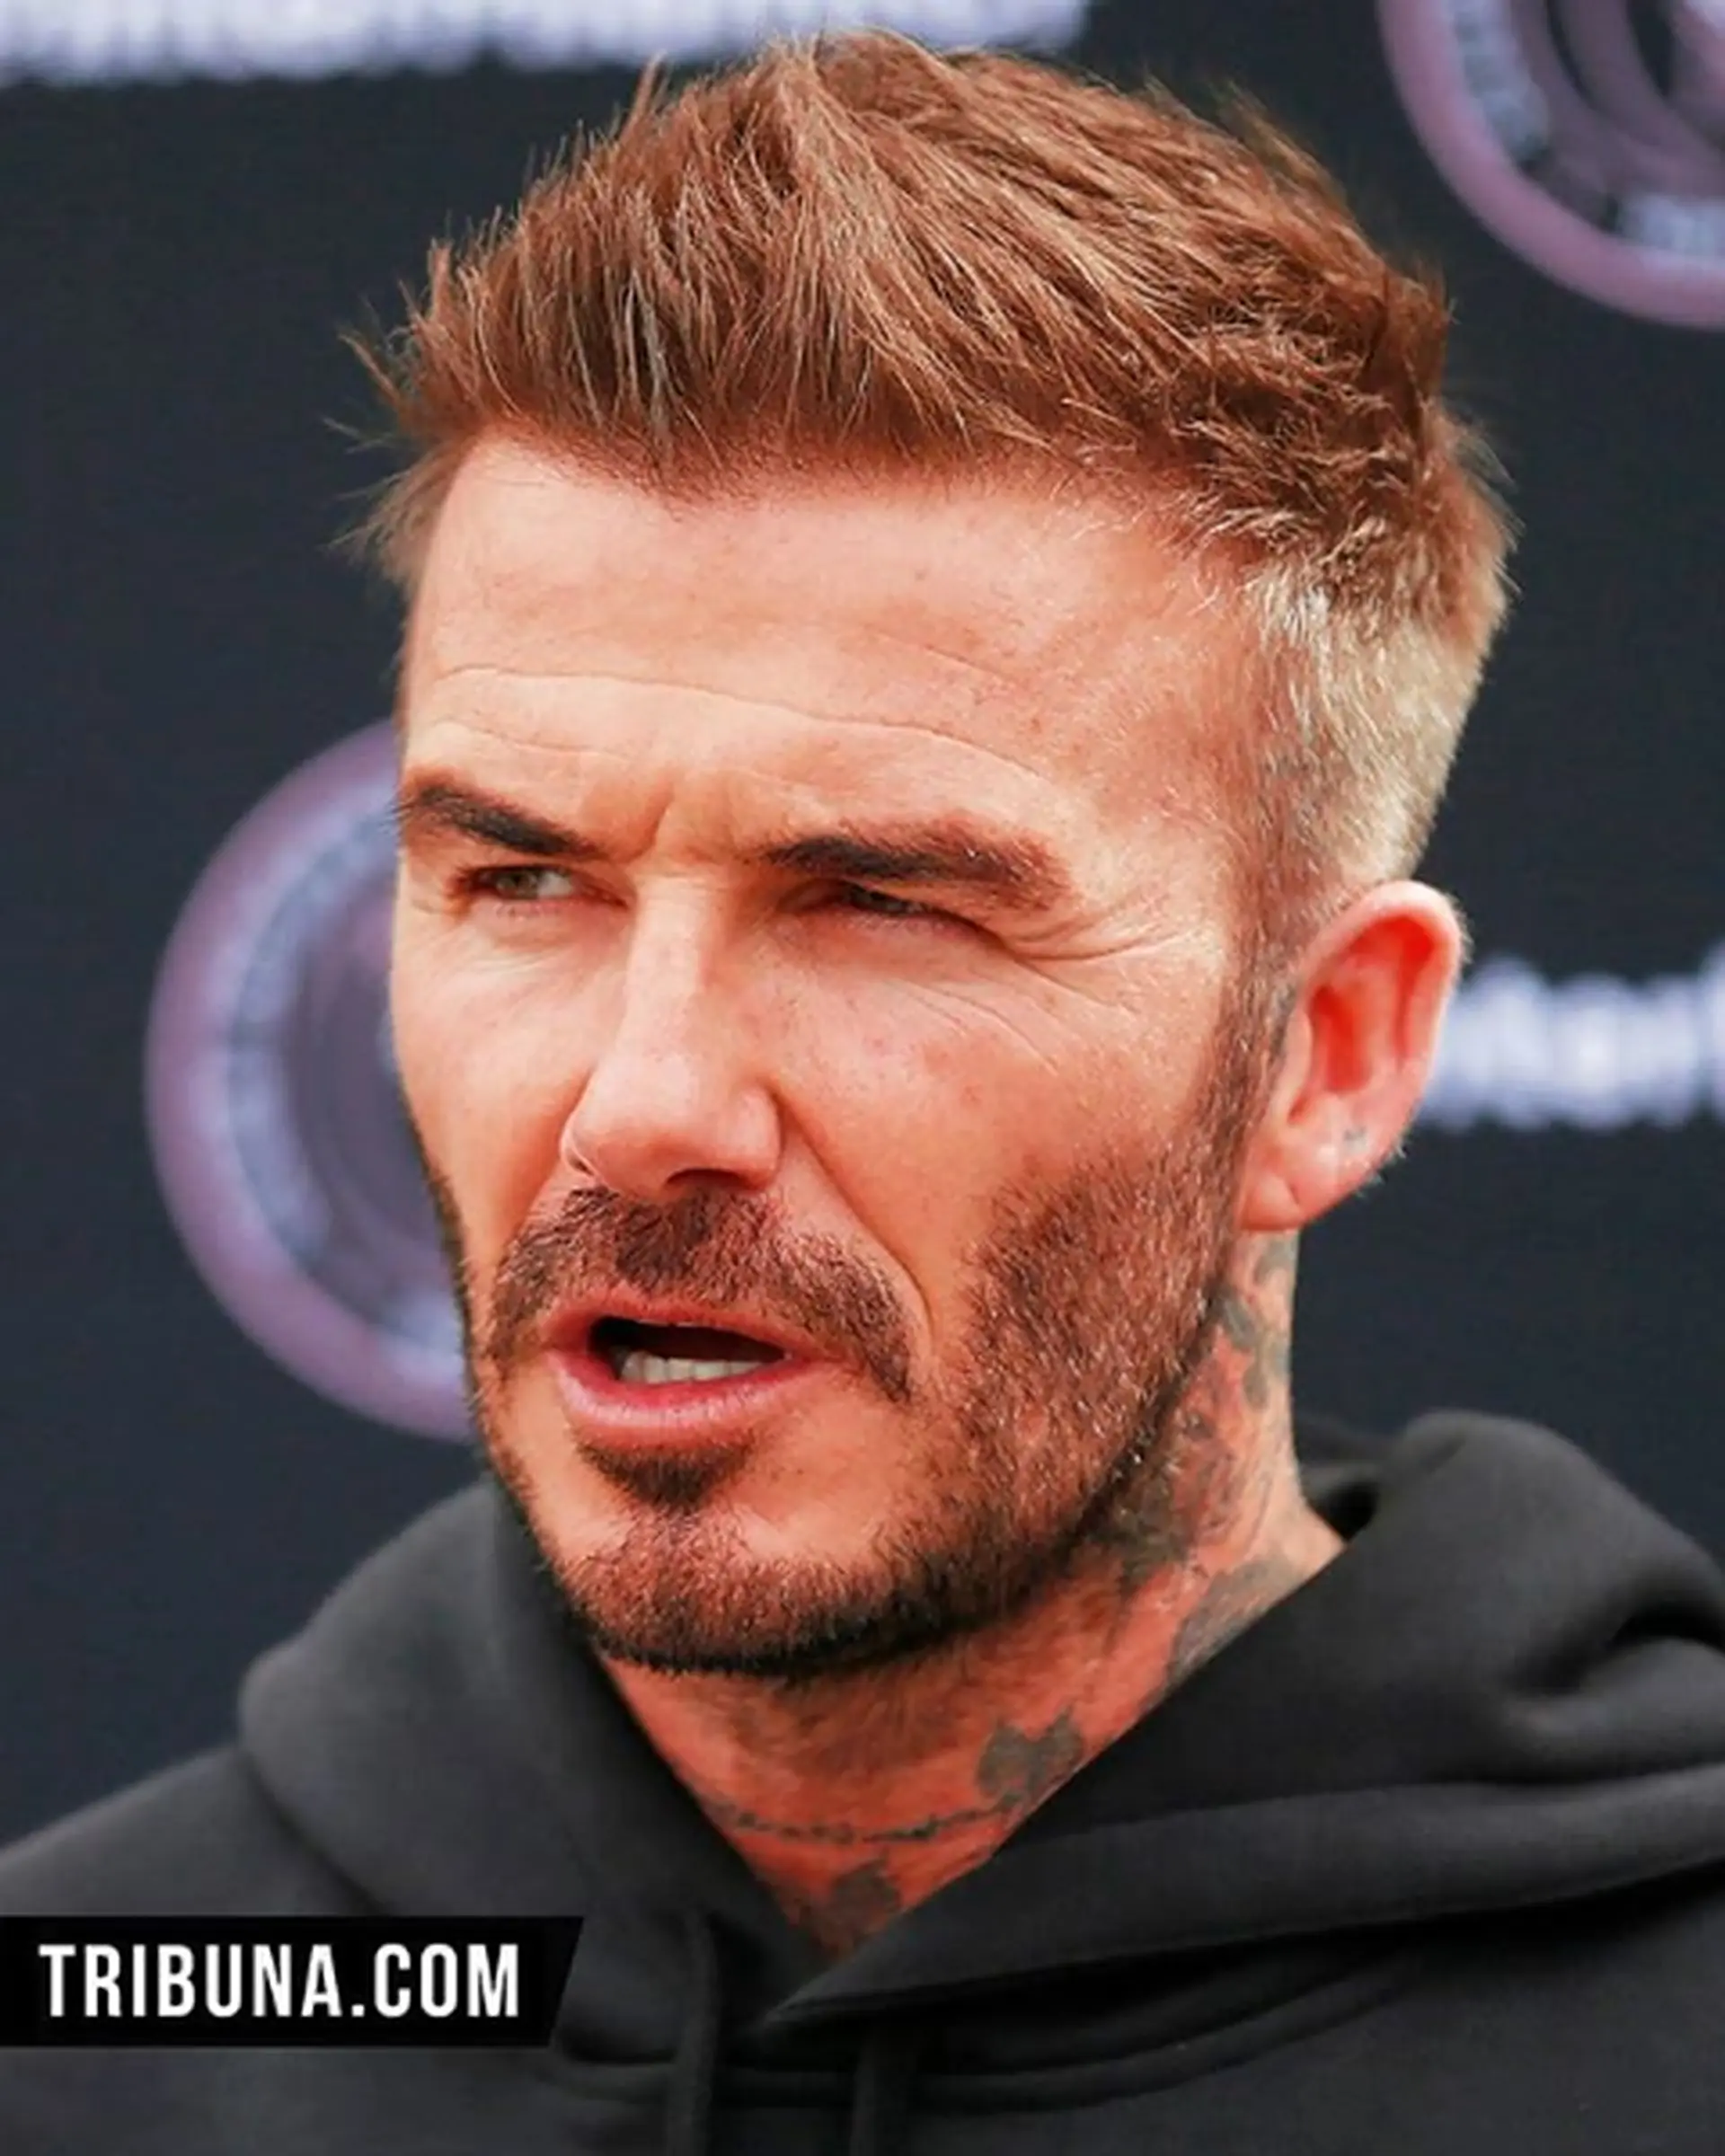 David Beckham’s Inter Miami FC become the first team in MLS history to lose their first five matches in the competition.